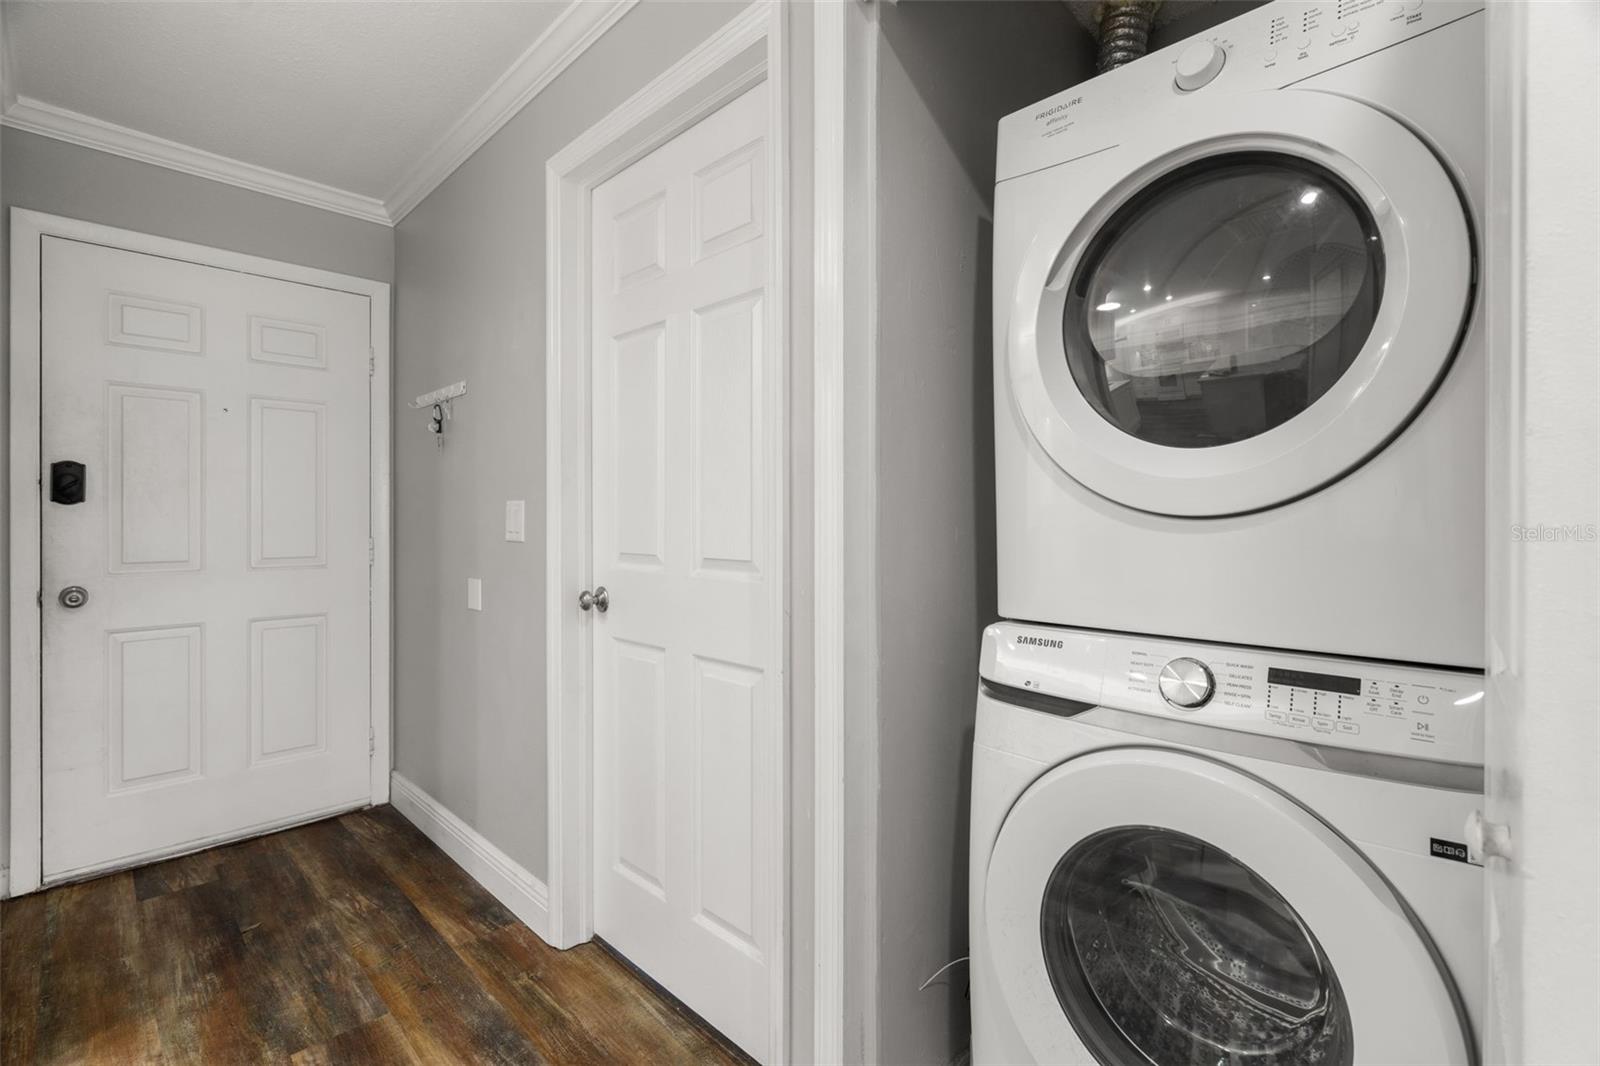 Your private laundry is conveniently located in the closet near the counter for folding options!